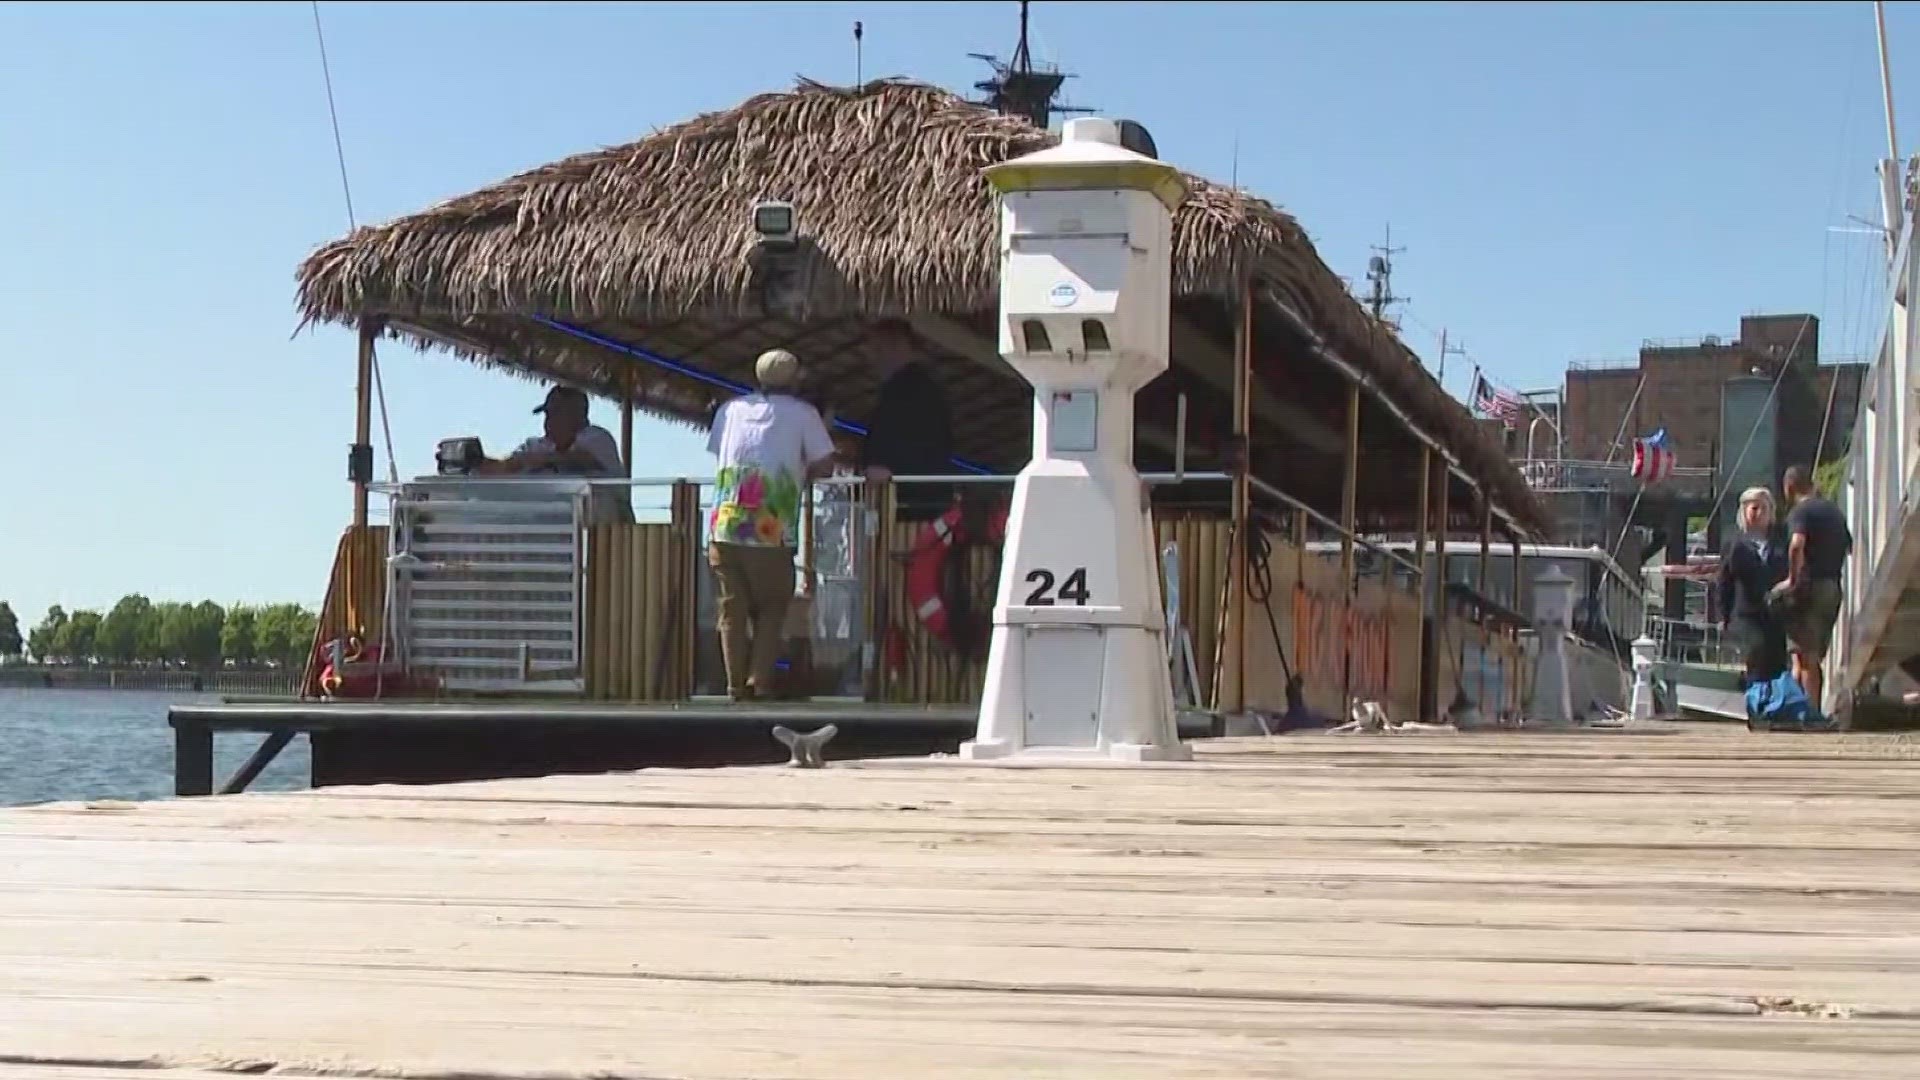 A new tiki-themed tour boat is offering rides for $28 per ticket.